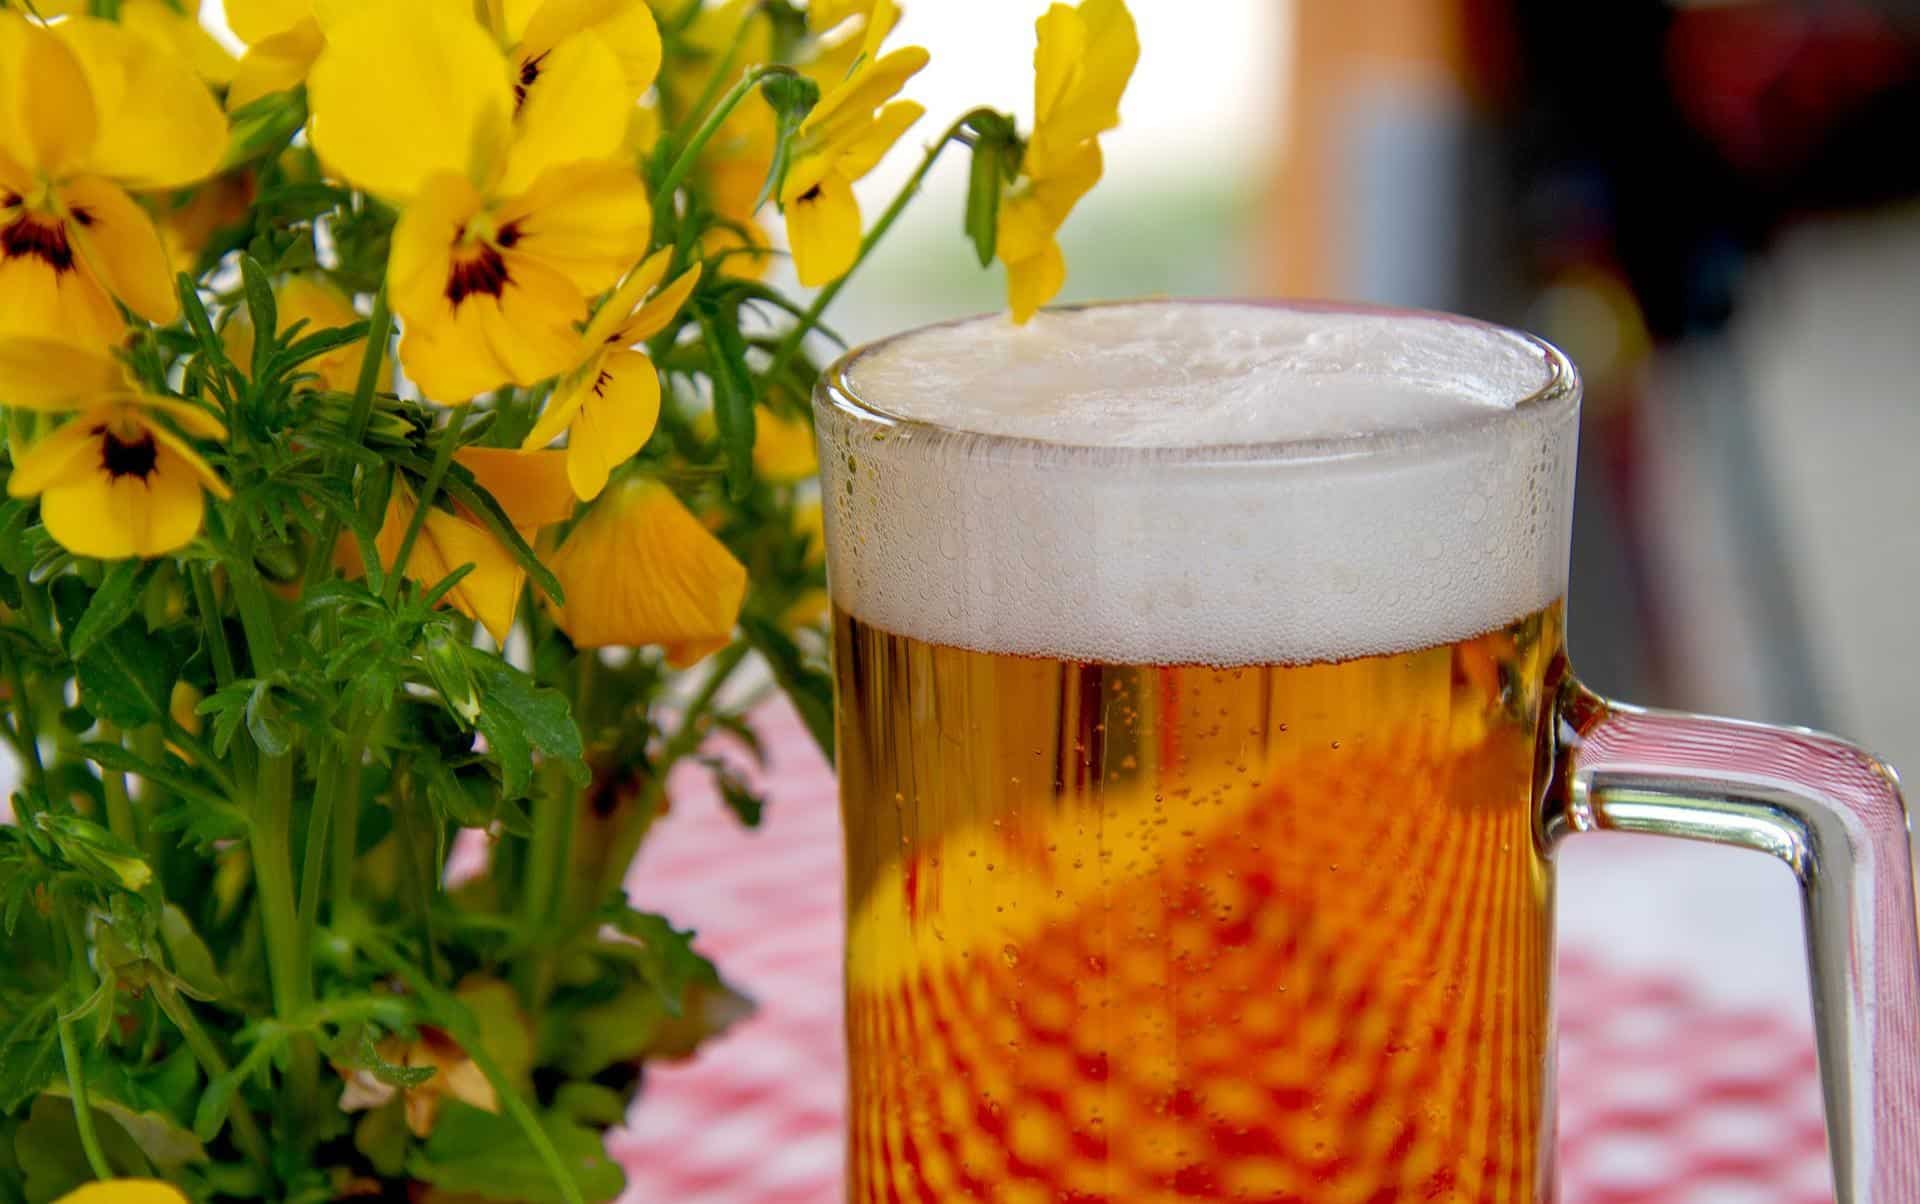 The best-selling beer in the world 